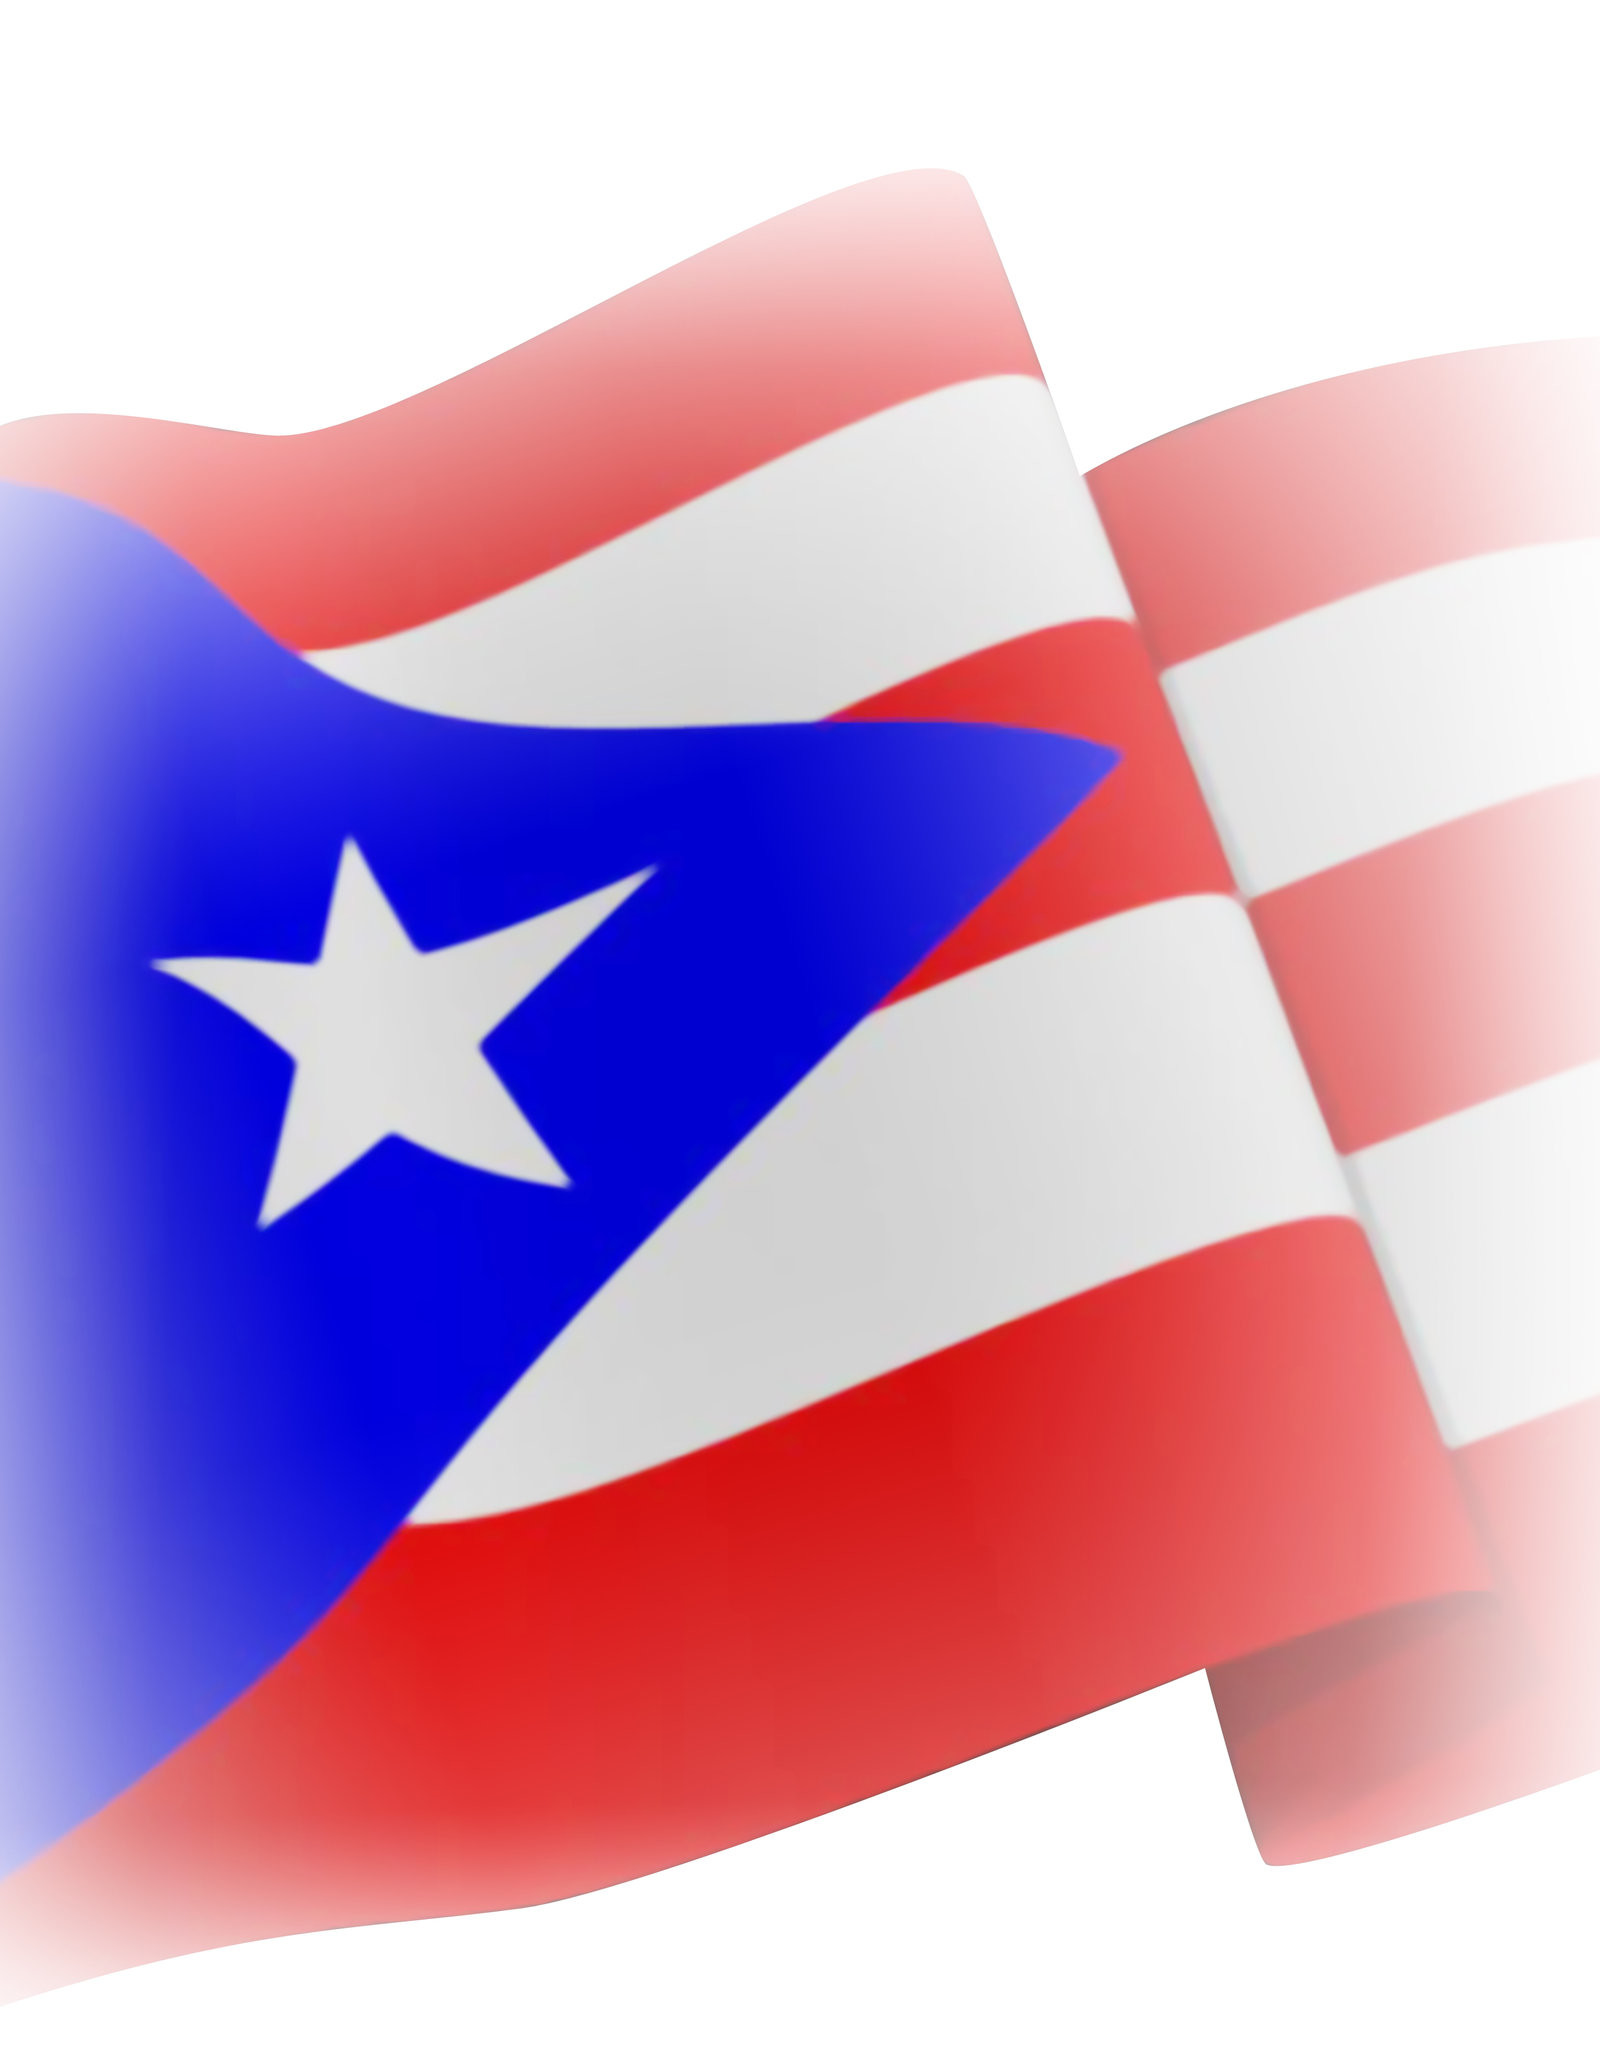 Download Puerto rico wallpaper by Chucho76  07  Free on ZEDGE now  Browse millions of popular black Wall  Puerto rico pictures Puerto rico Puerto  rico tattoo